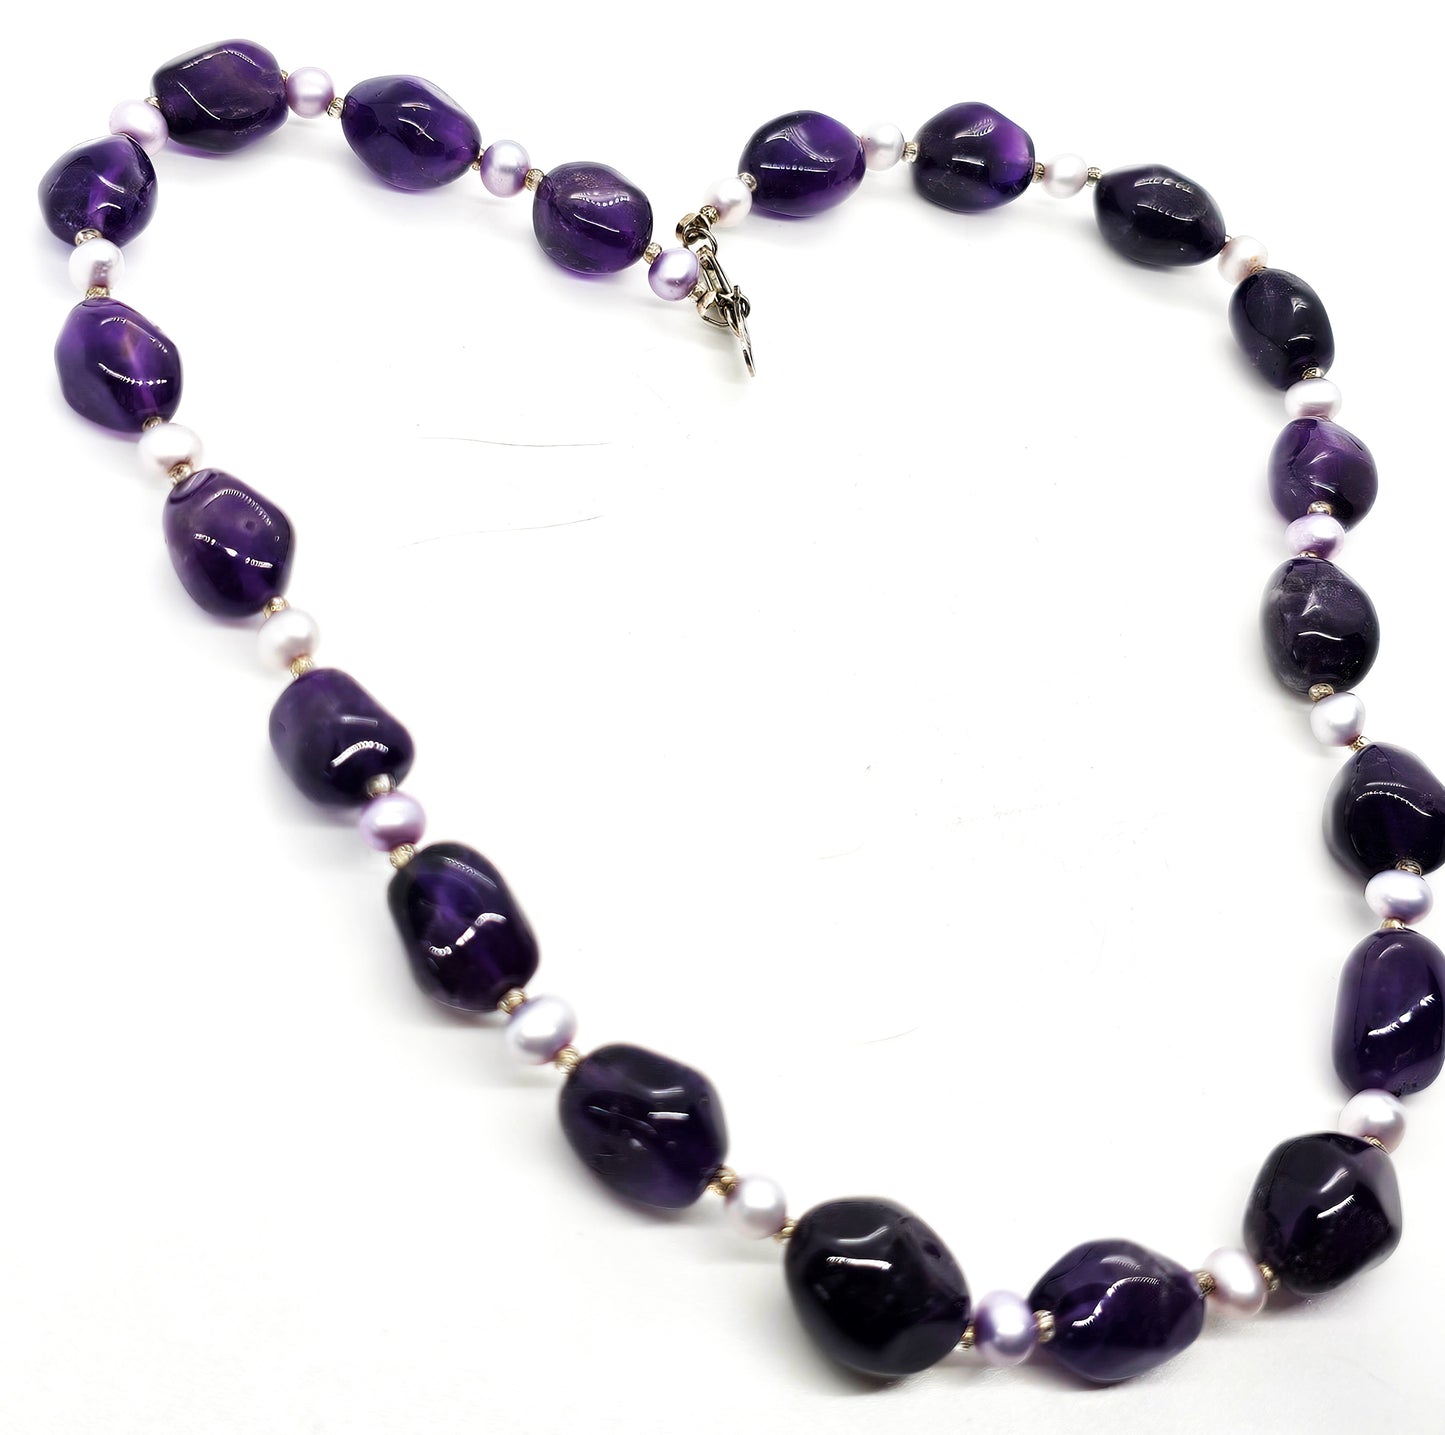 21st and stone signed Amethyst and pearl beaded sterling silver necklace